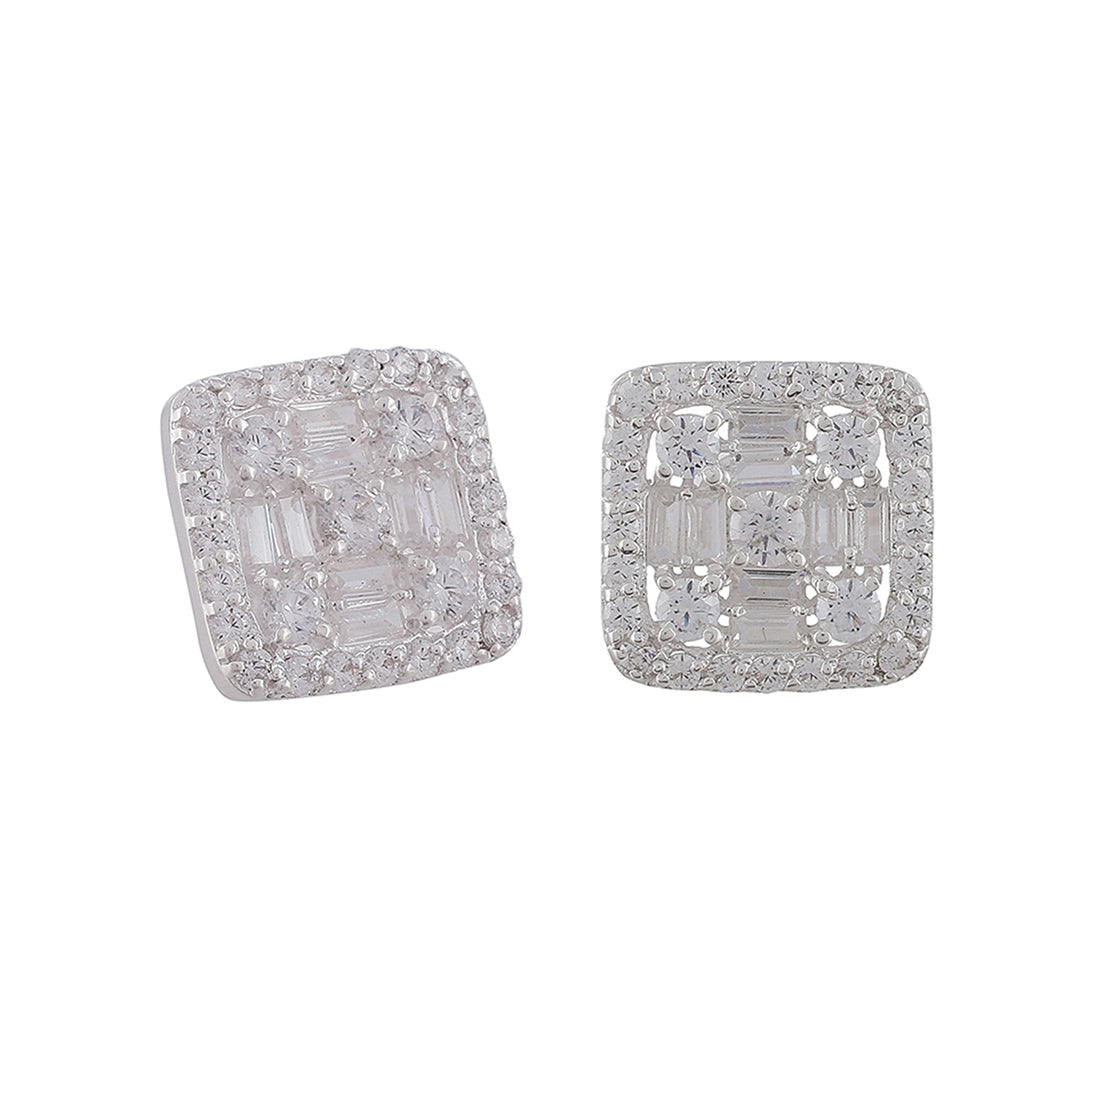 Square Shaped Stud Earrings Decked With CZ